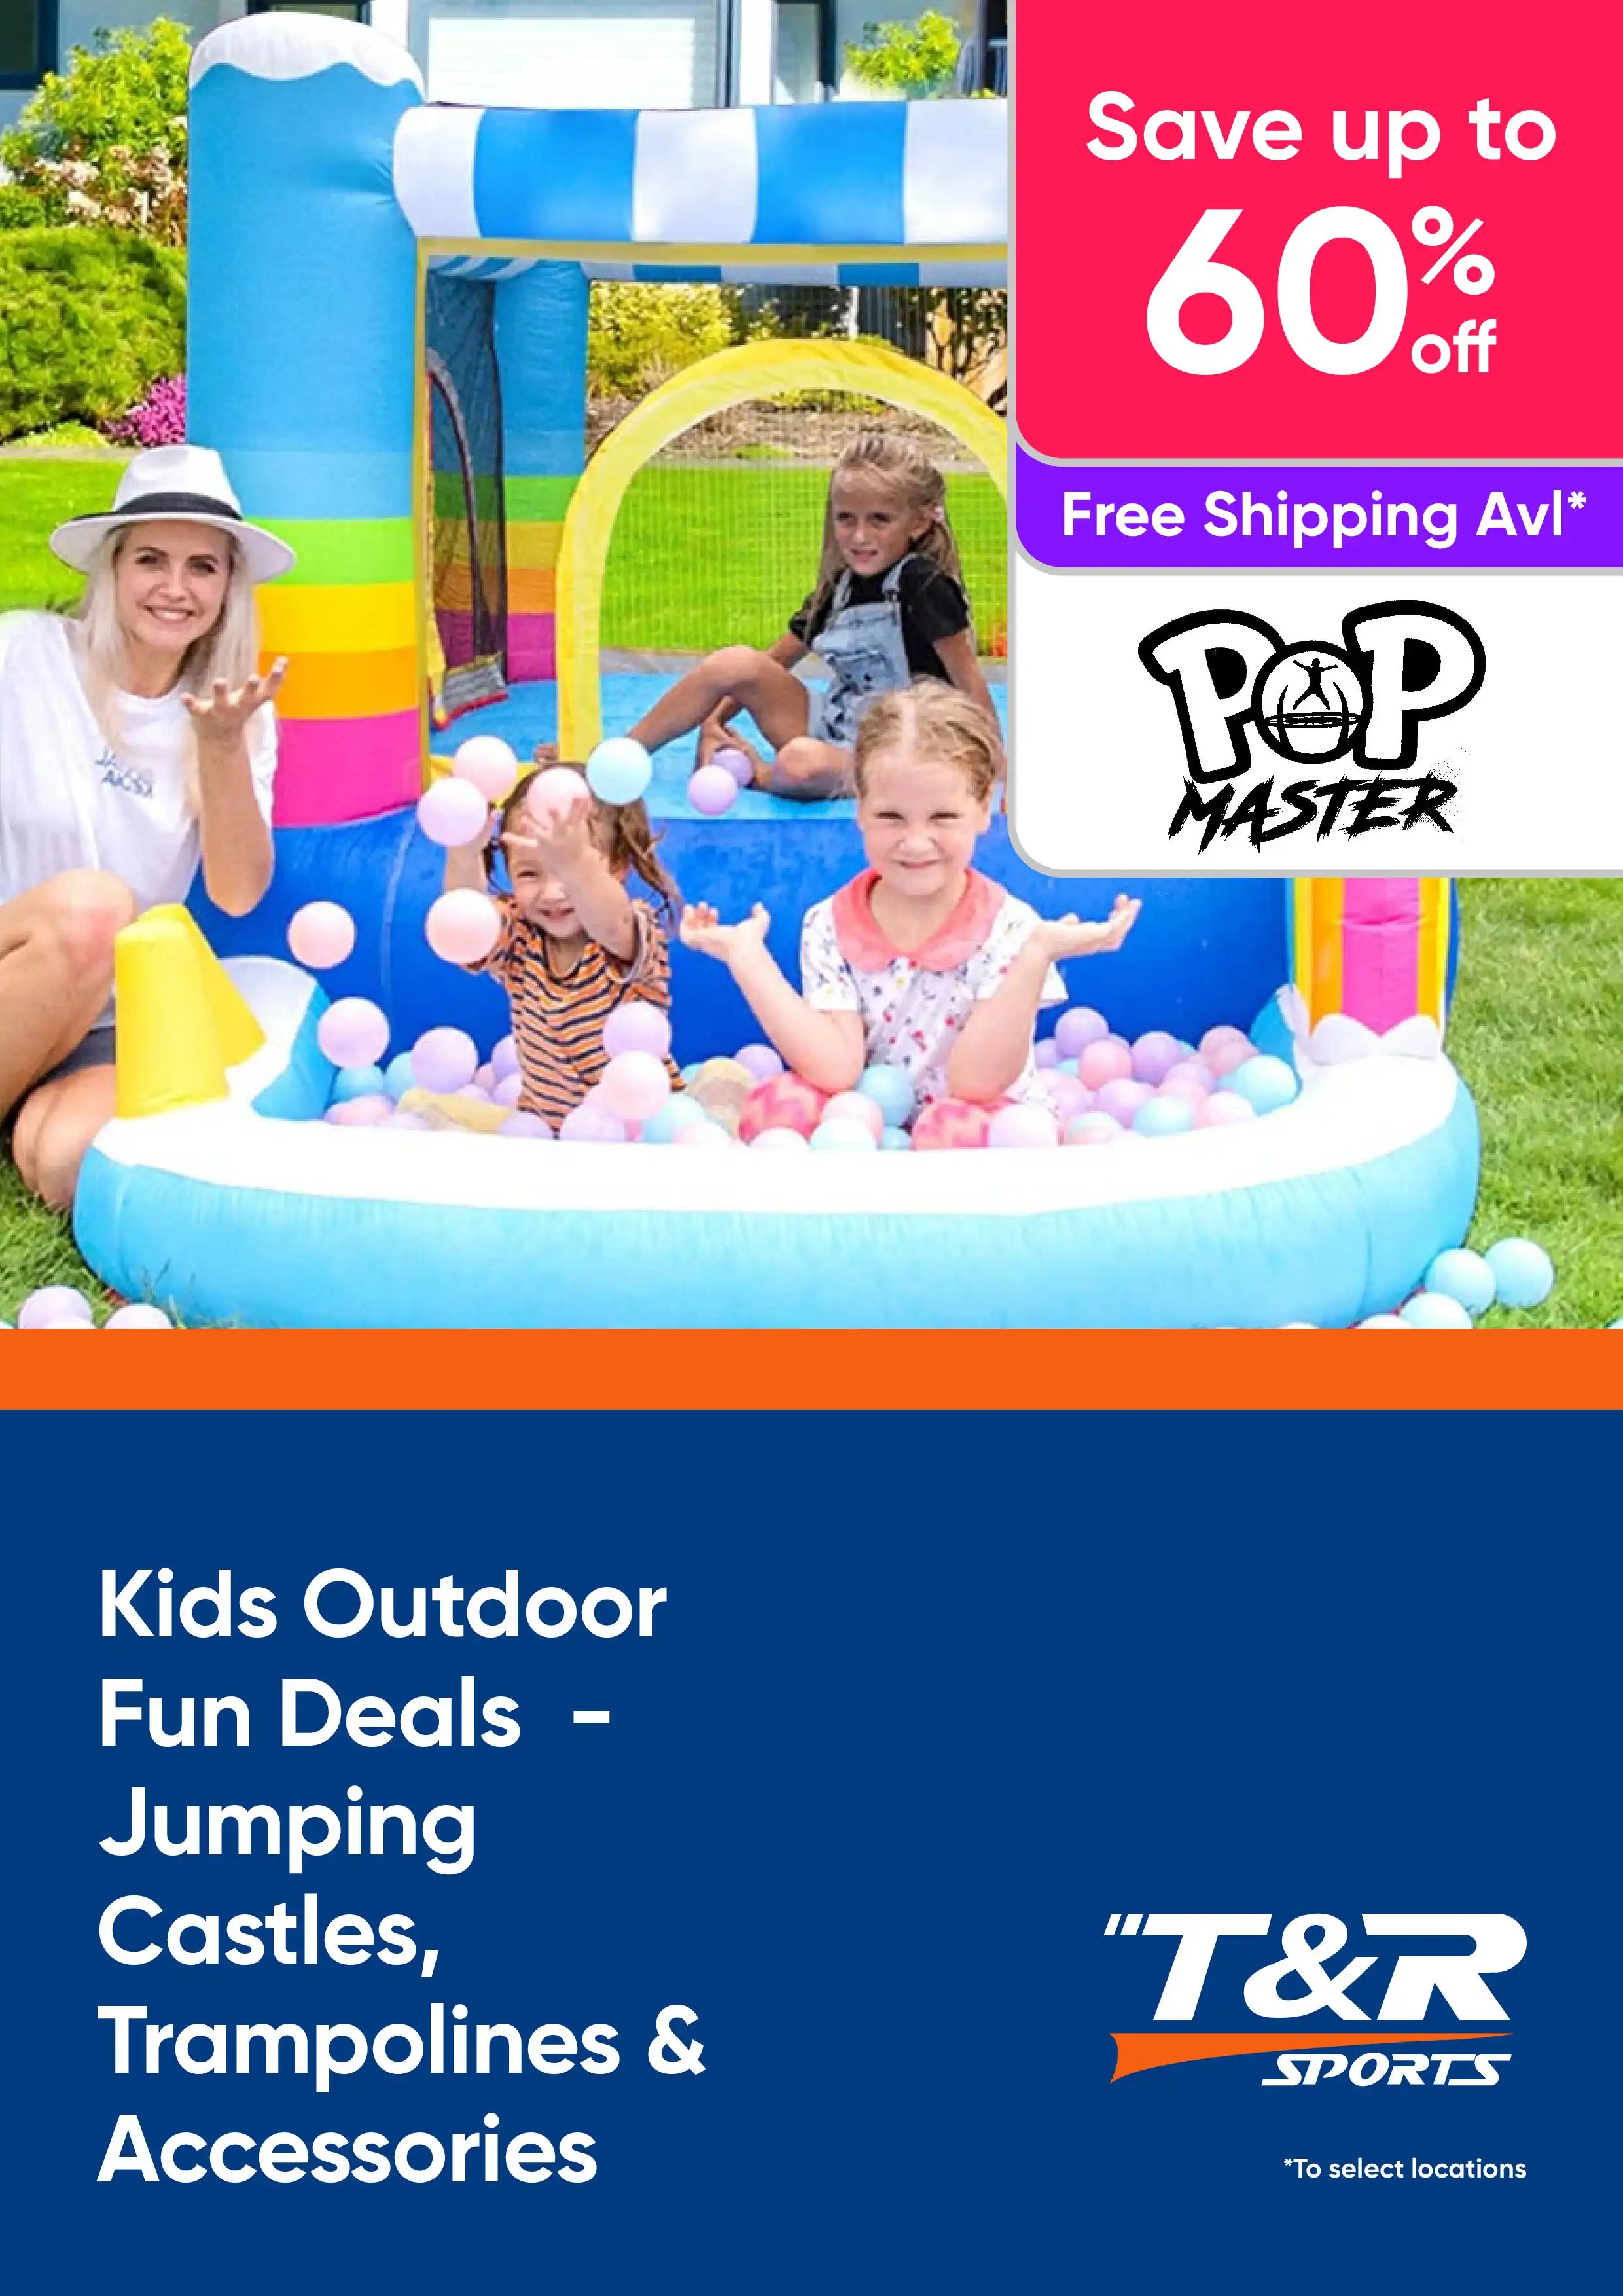 Kids Outdoor Fun Deals  - Save Up To 60% Off Jumping Castles, Trampolines and Accessories